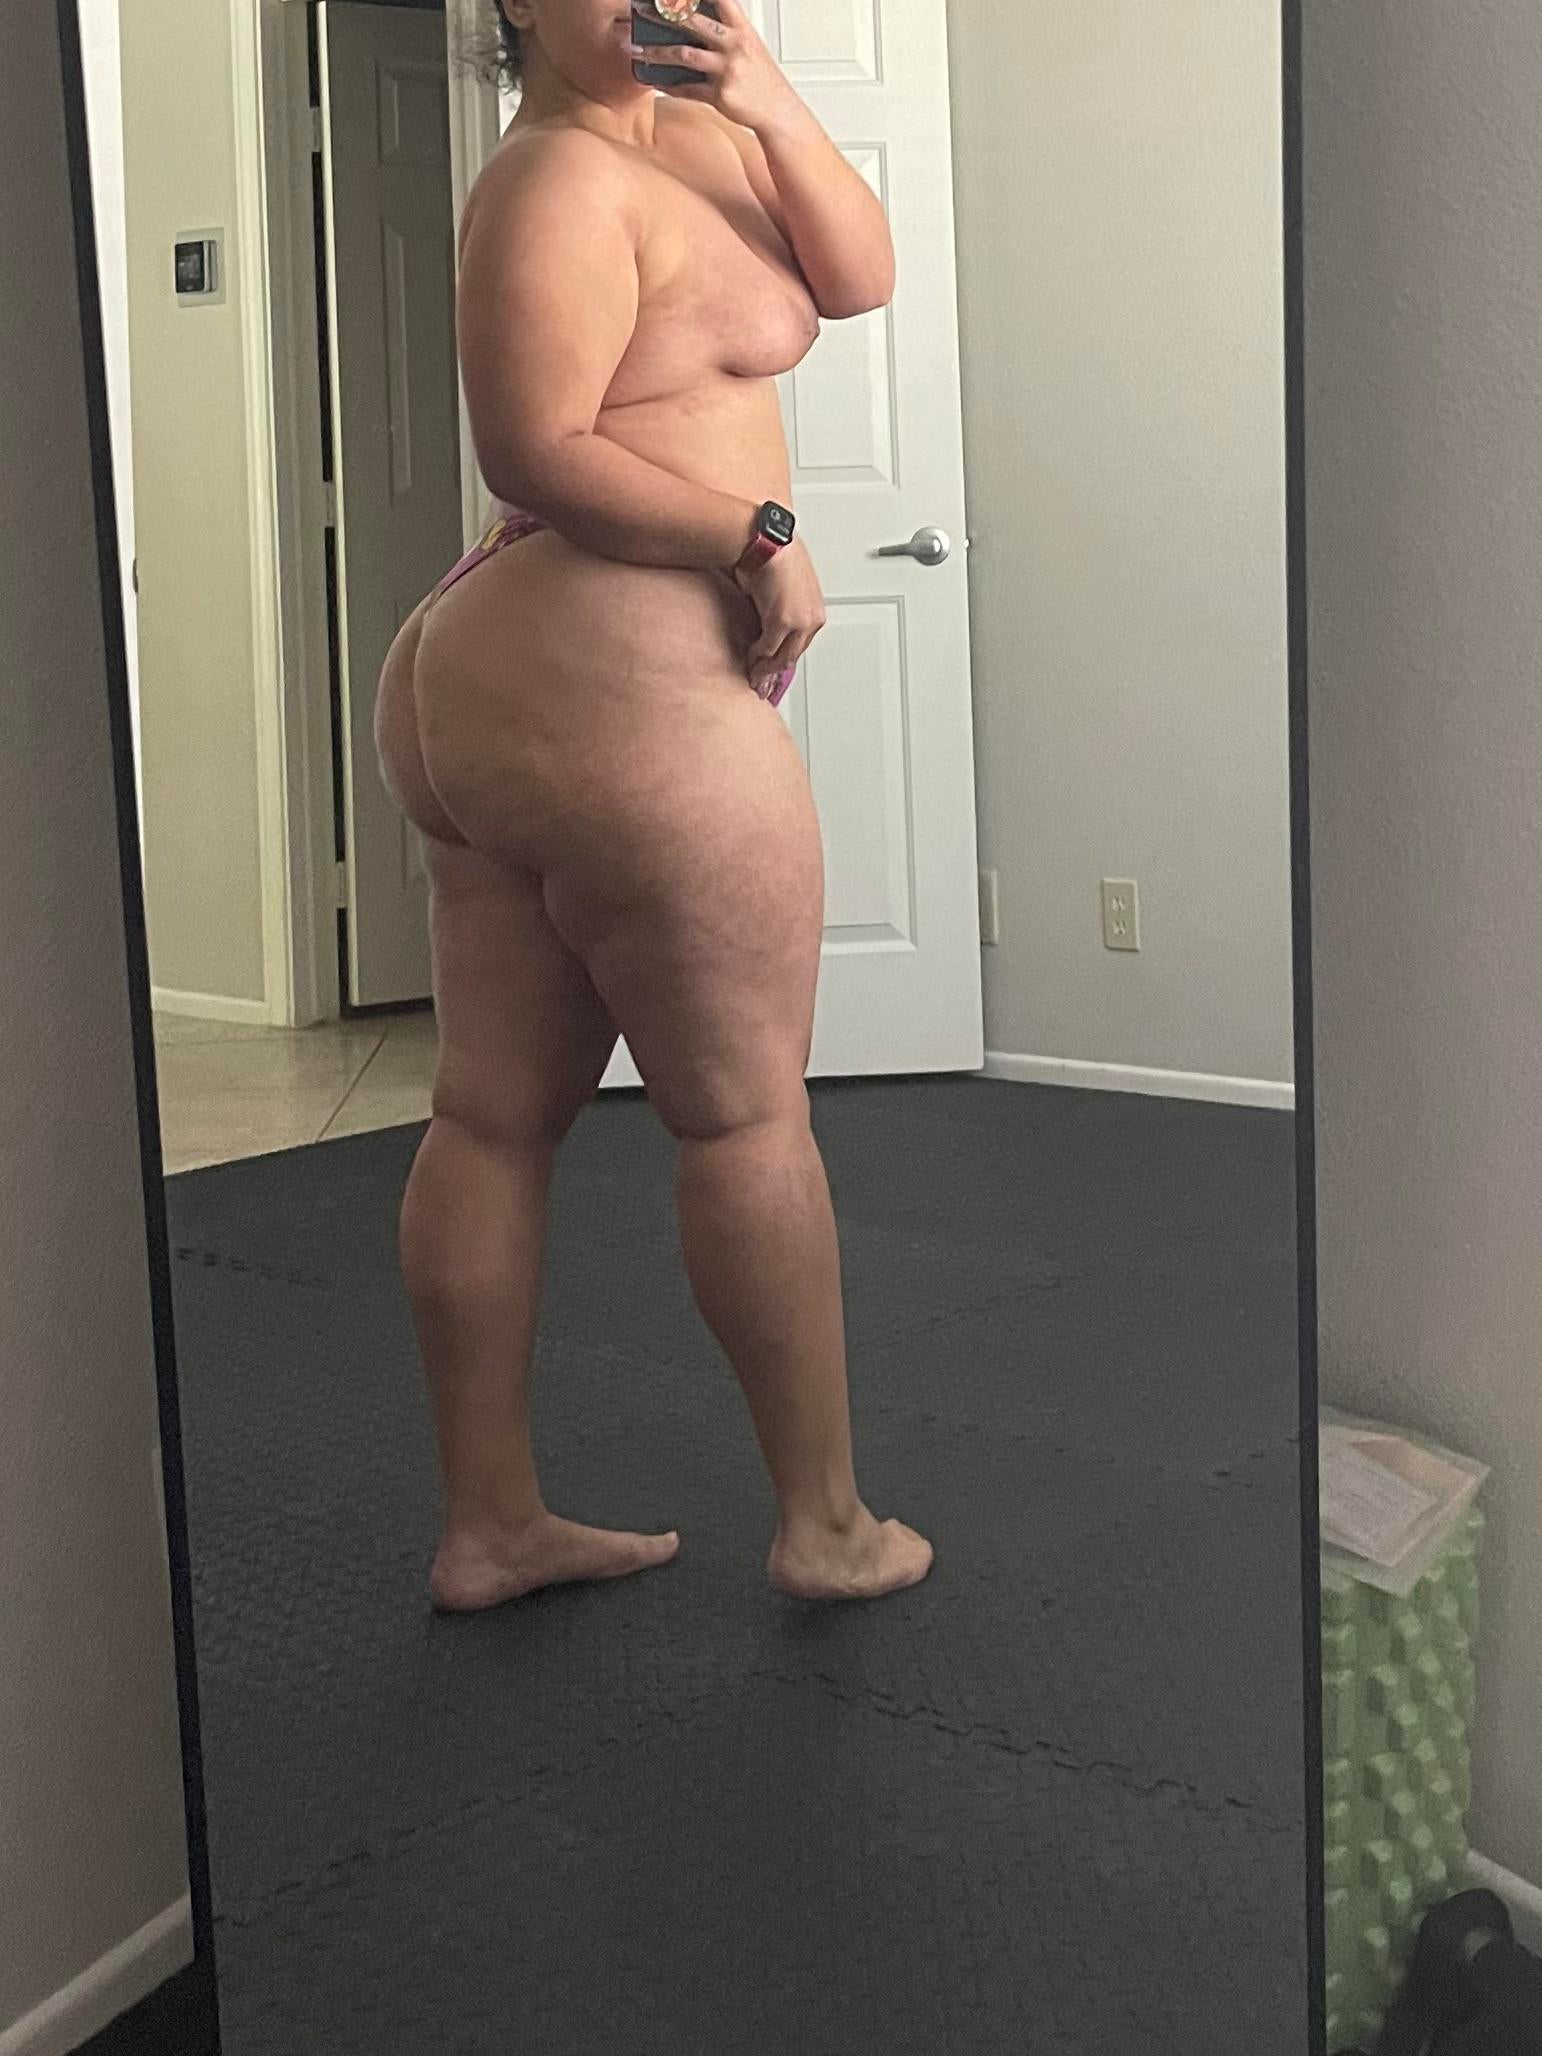 Chubby Big Tits -  My new Dom asked me to show off the workout attire He picked for me 💕